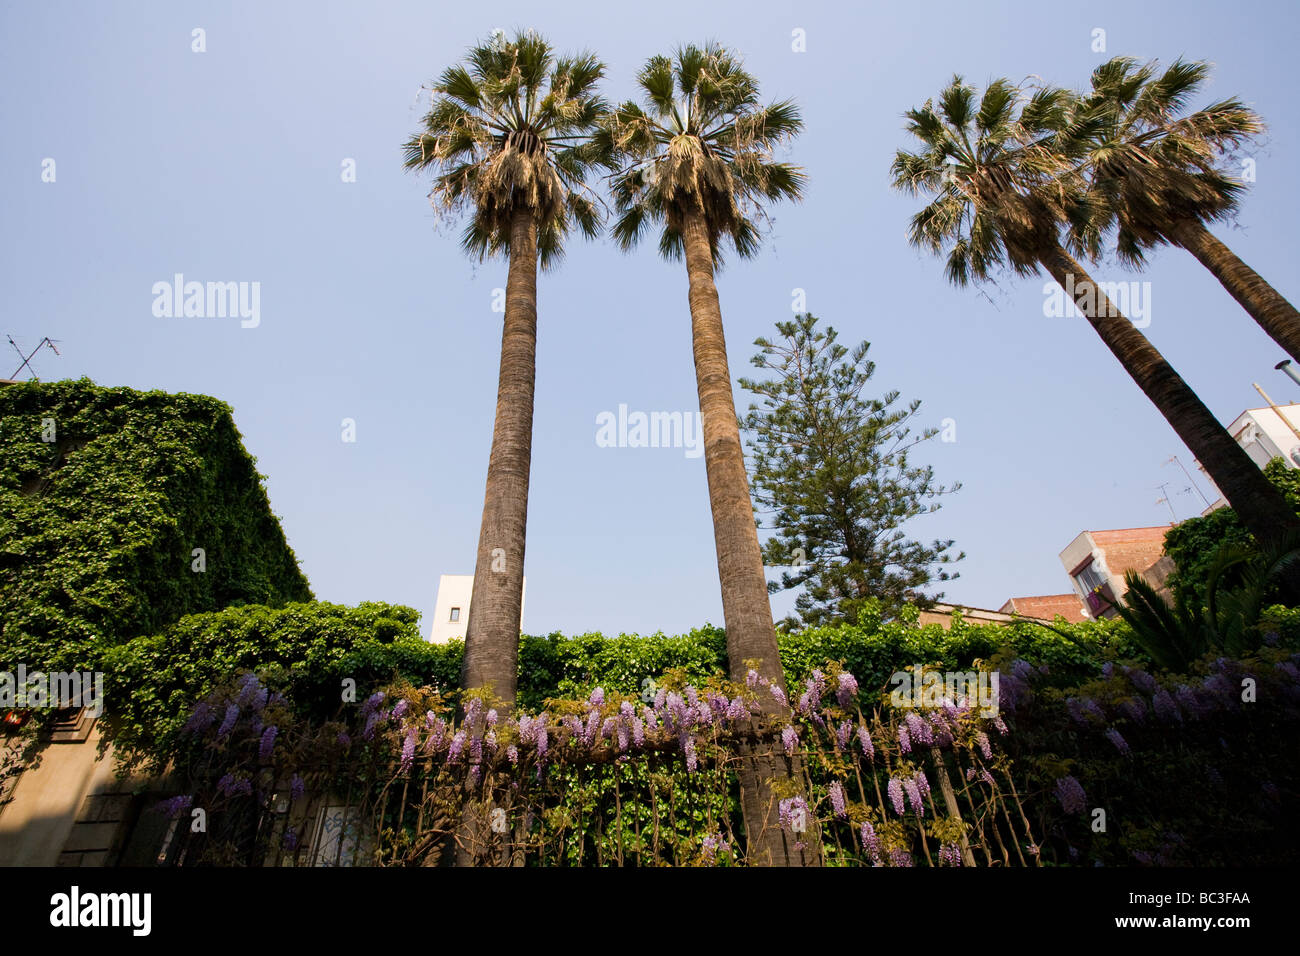 Tall palm trees in the middle of an urban garden. Stock Photo